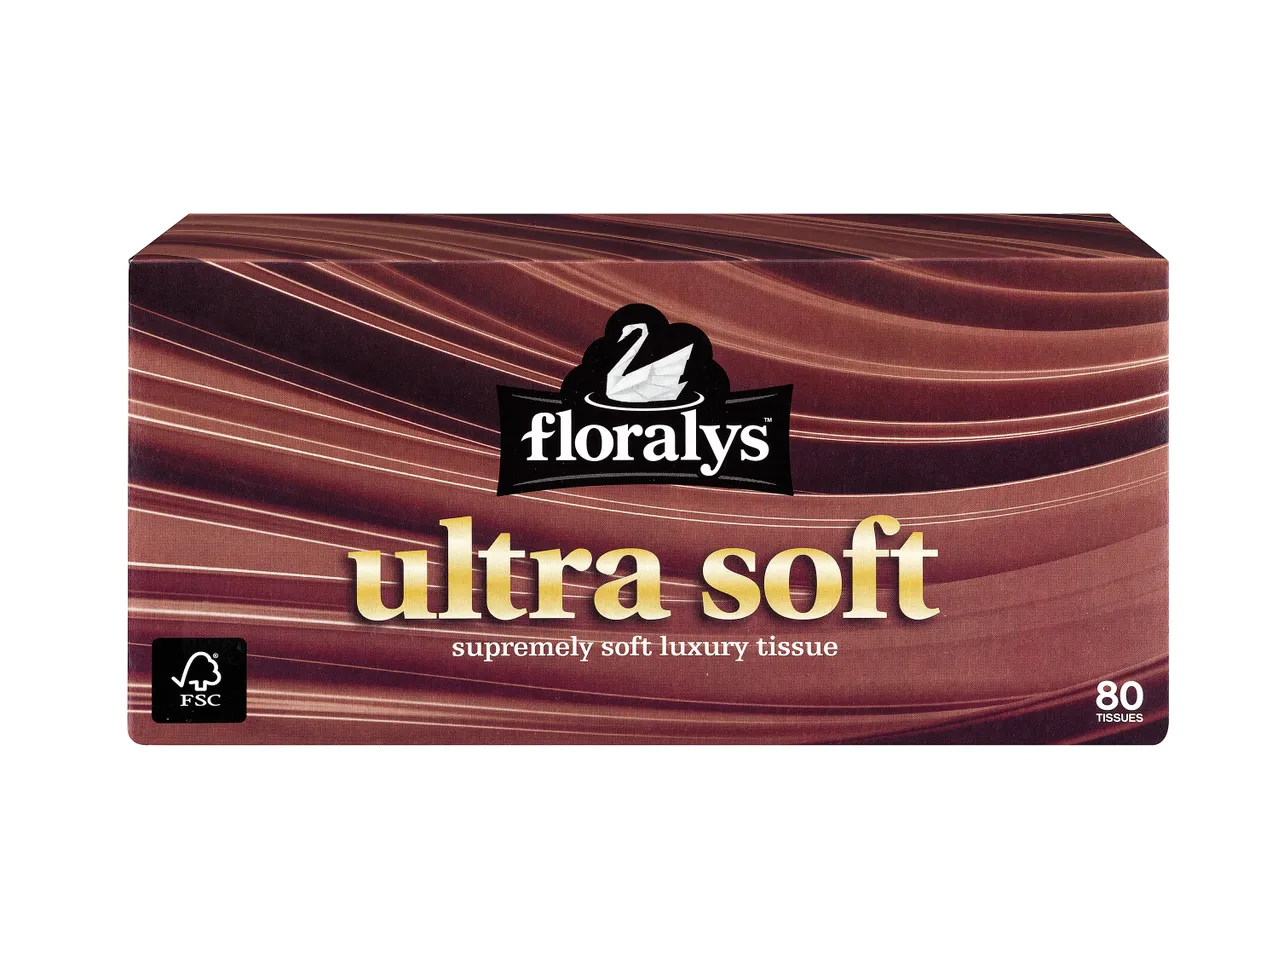 Go to full screen view: Floralys Facial Tissues - Image 1